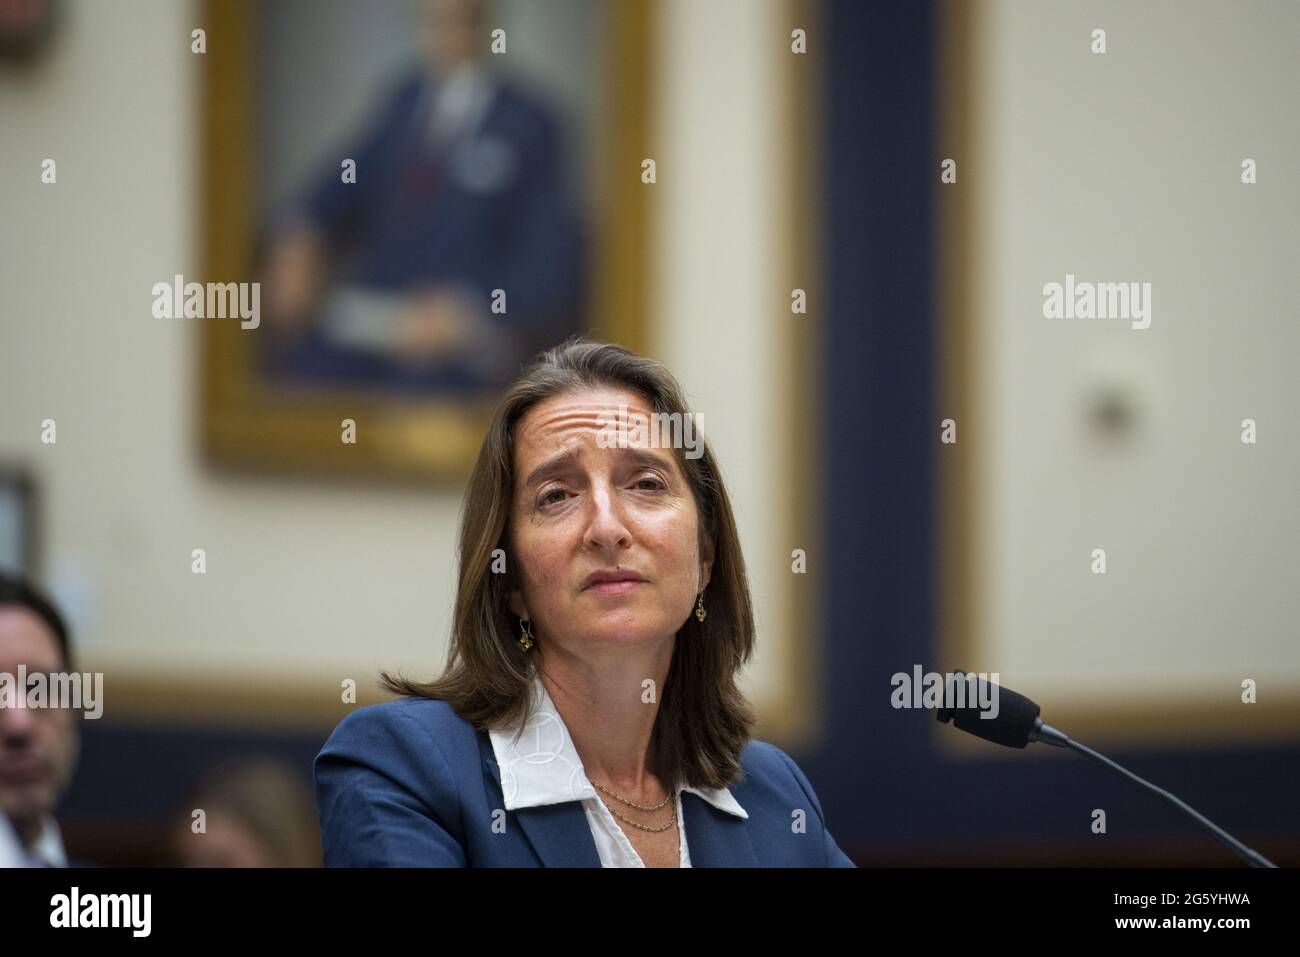 Lynn Oberlander of Counsel, Ballard Spahr LLP, appears before a House Committee on the Judiciary hearing 'Secrecy Orders and Prosecuting Leaks: Potential Legislative Responses to Deter Prosecutorial Abuse of Power' in the Rayburn House Office Building in Washington, DC, USA, Wednesday, June 30, 2021. Photo by Rod Lamkey/CNP/ABACAPRESS.COM Stock Photo